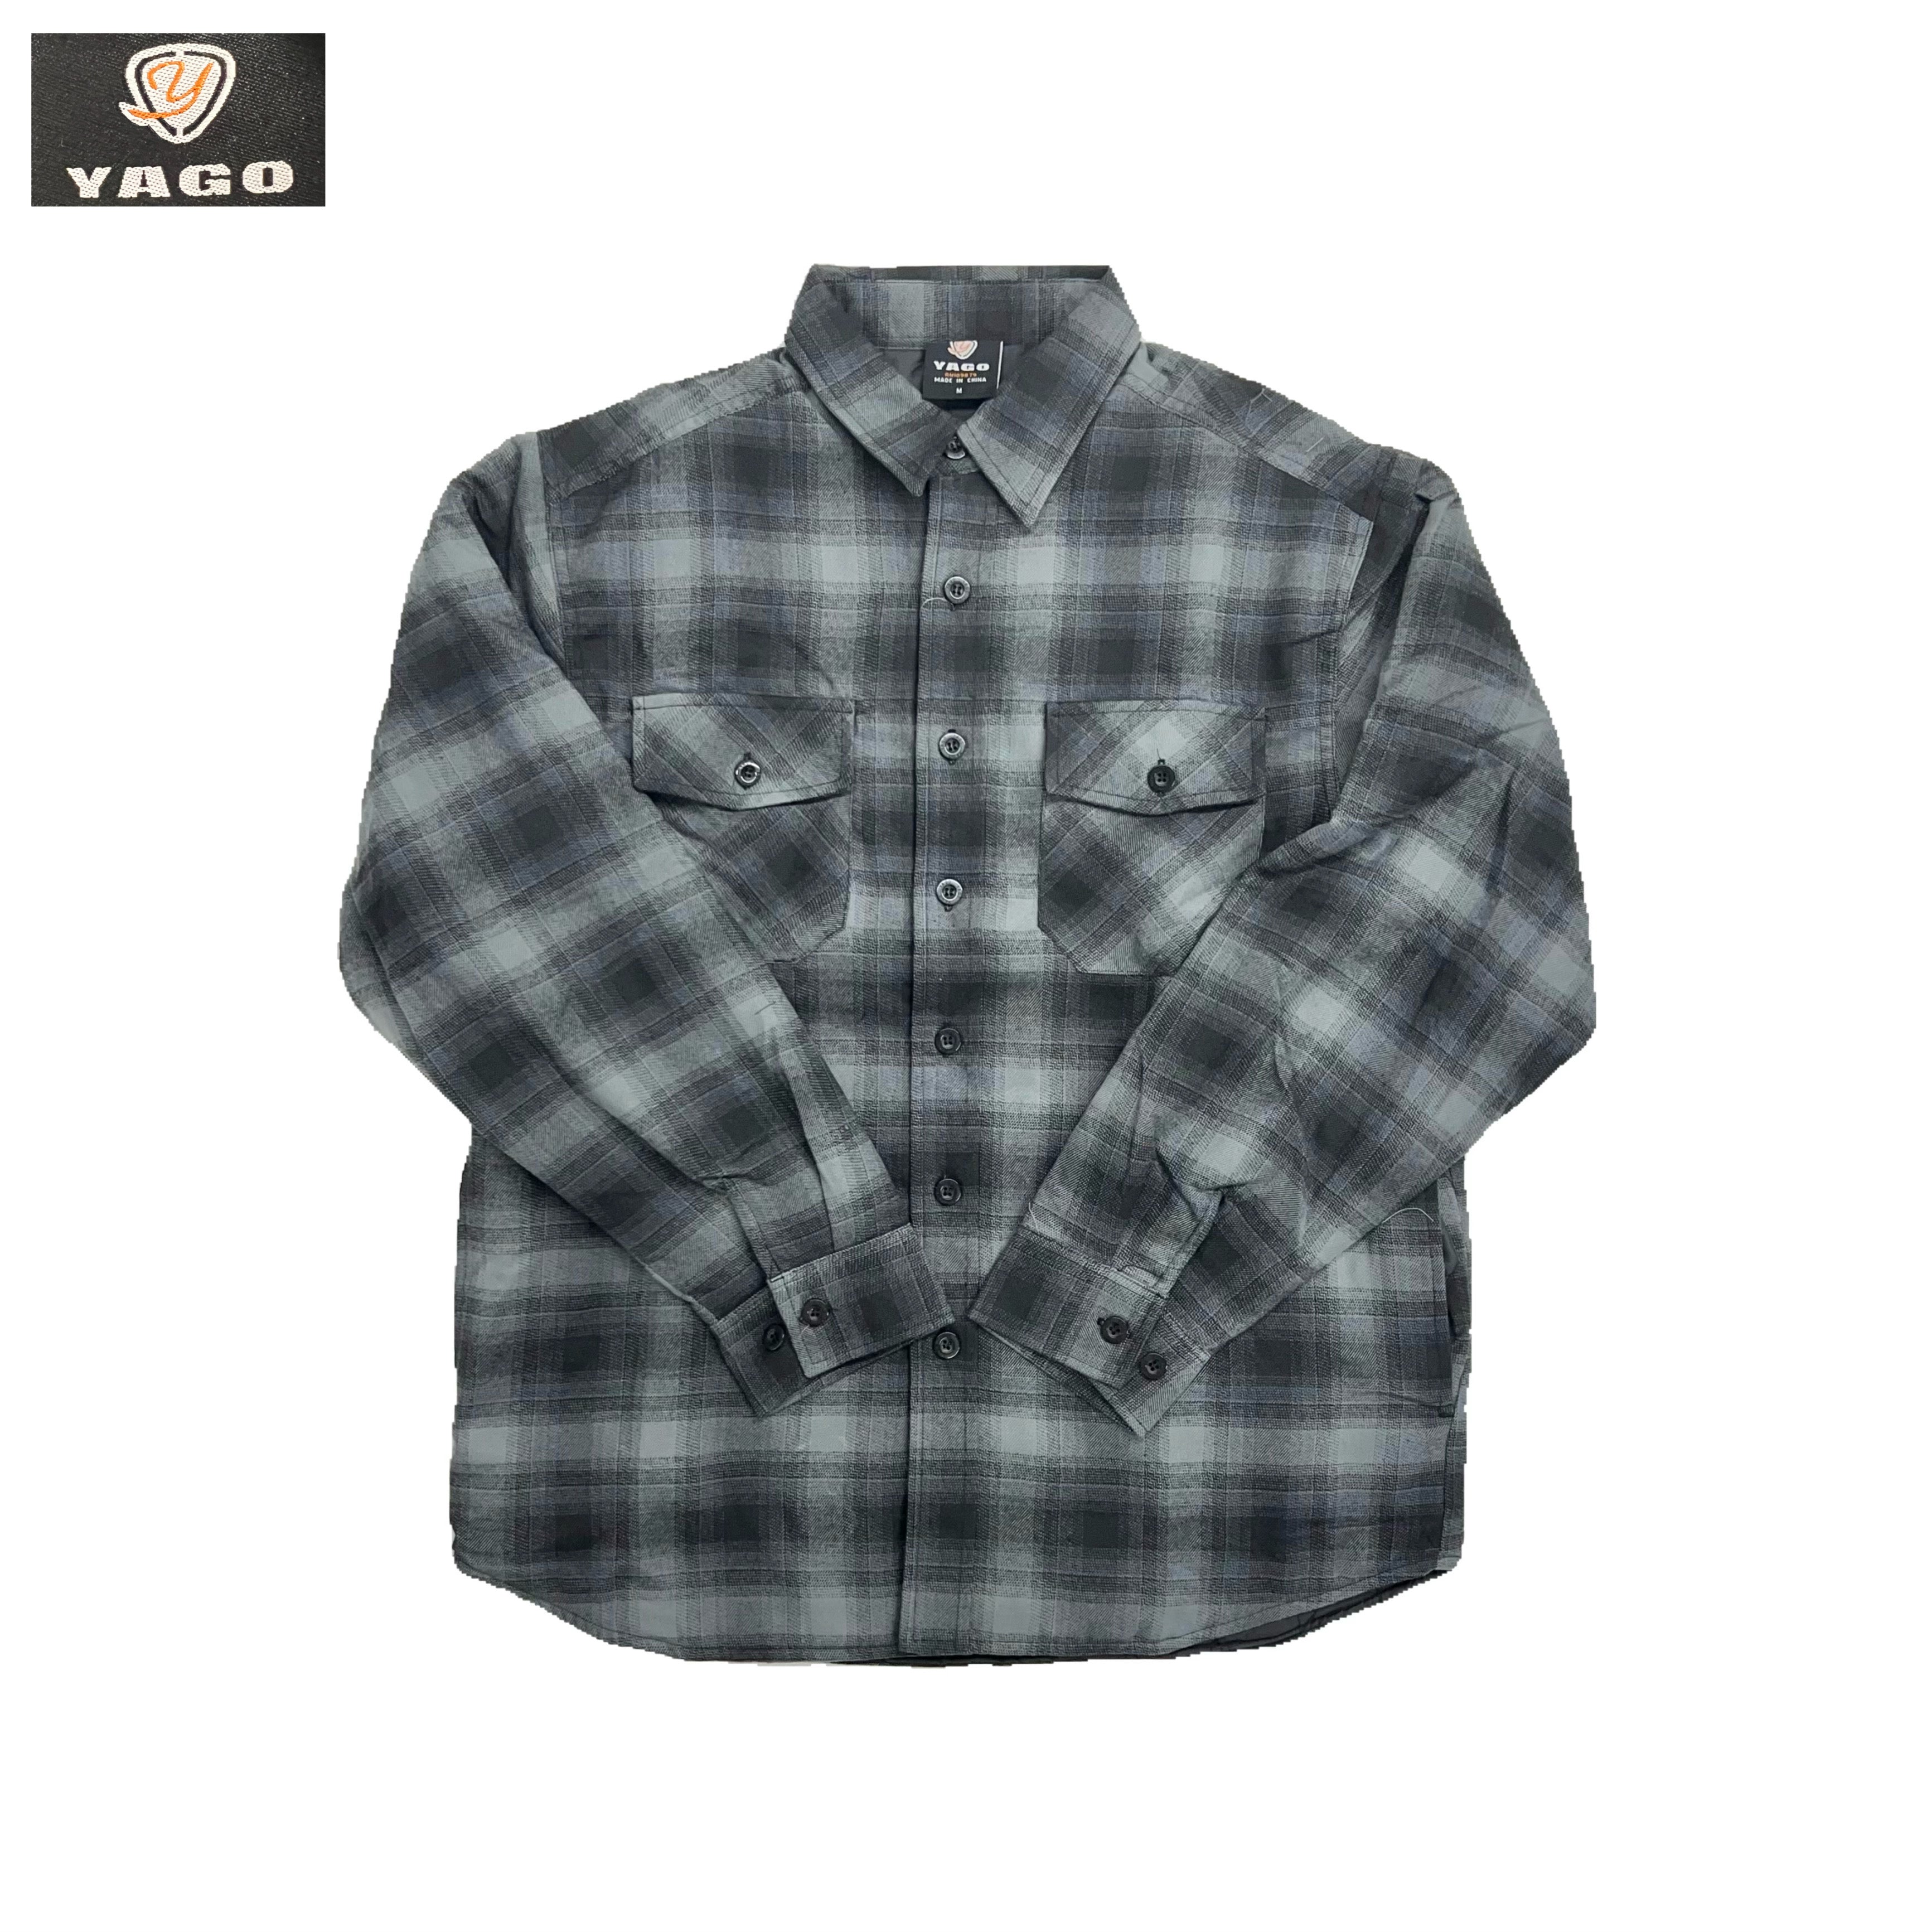 Yago Flannel Shirt Jacket with Two Side Pockets